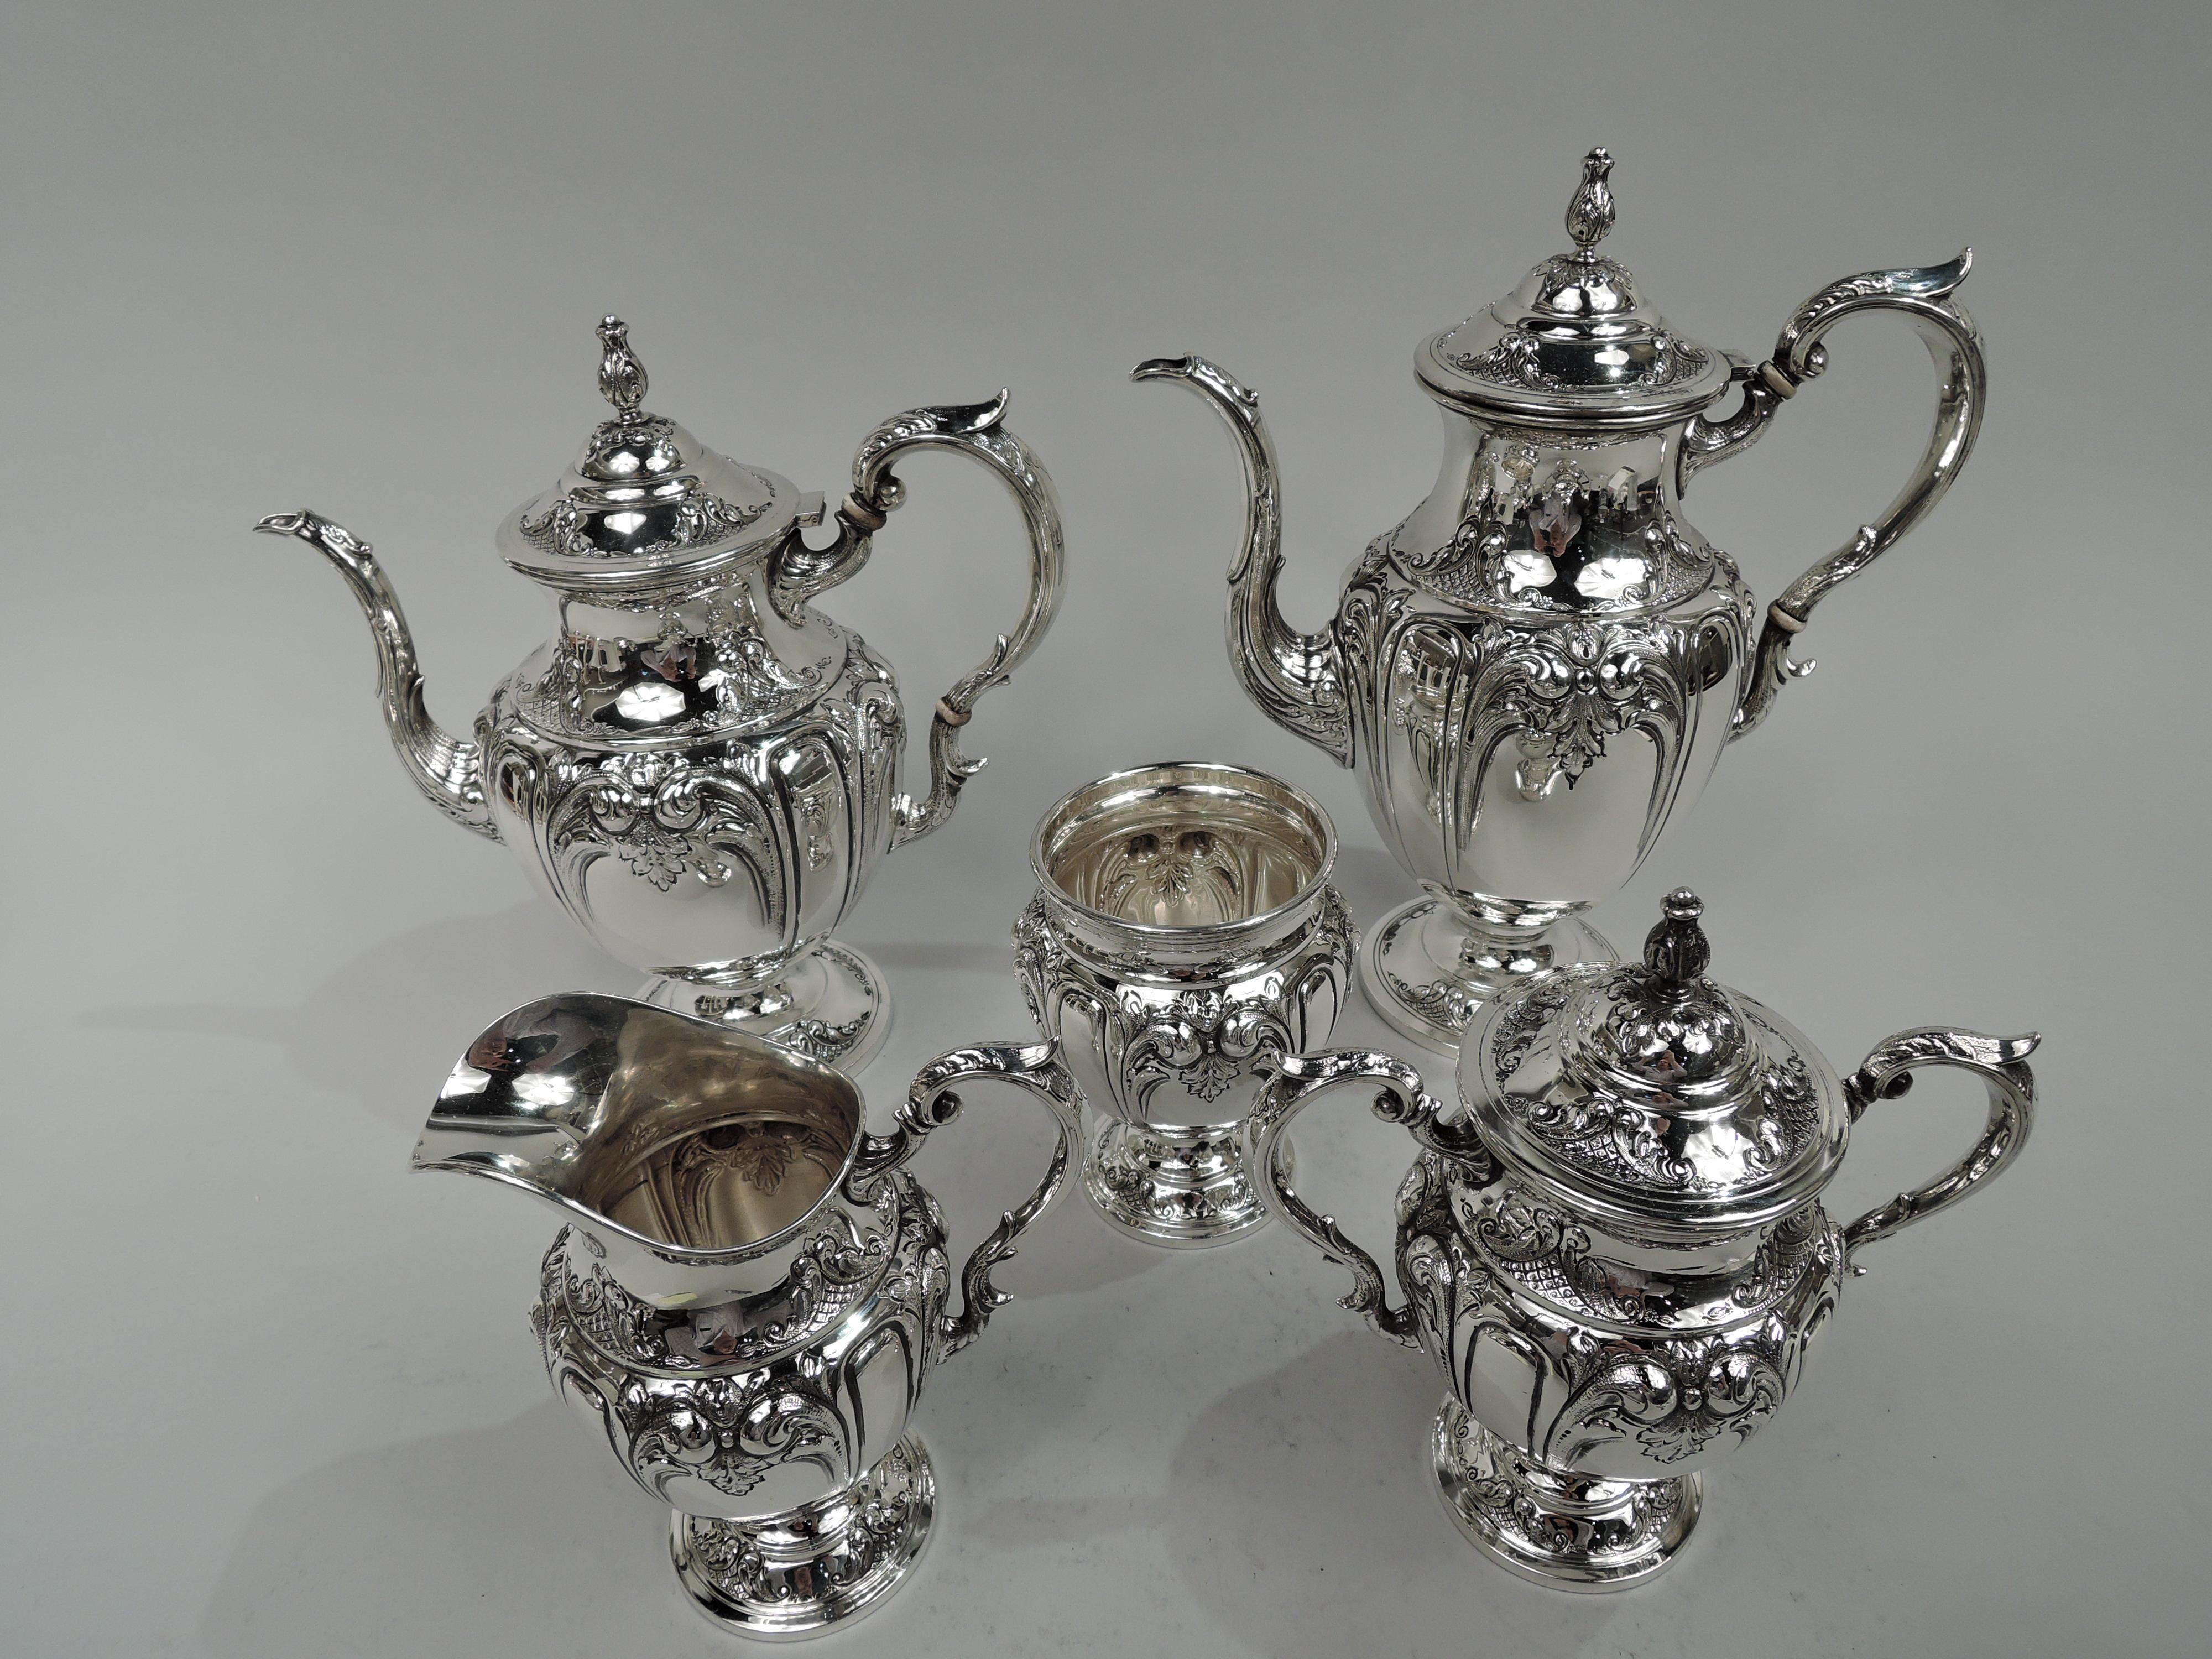 Victoria pattern sterling silver coffee and tea set. Made by Fisher in Jersey City. This set comprises 5 pieces: Coffeepot, teapot, creamer, sugar, and waste bowl. Each: Ovoid body on domed foot. Handles leaf-capped and double-scrolled. Covers